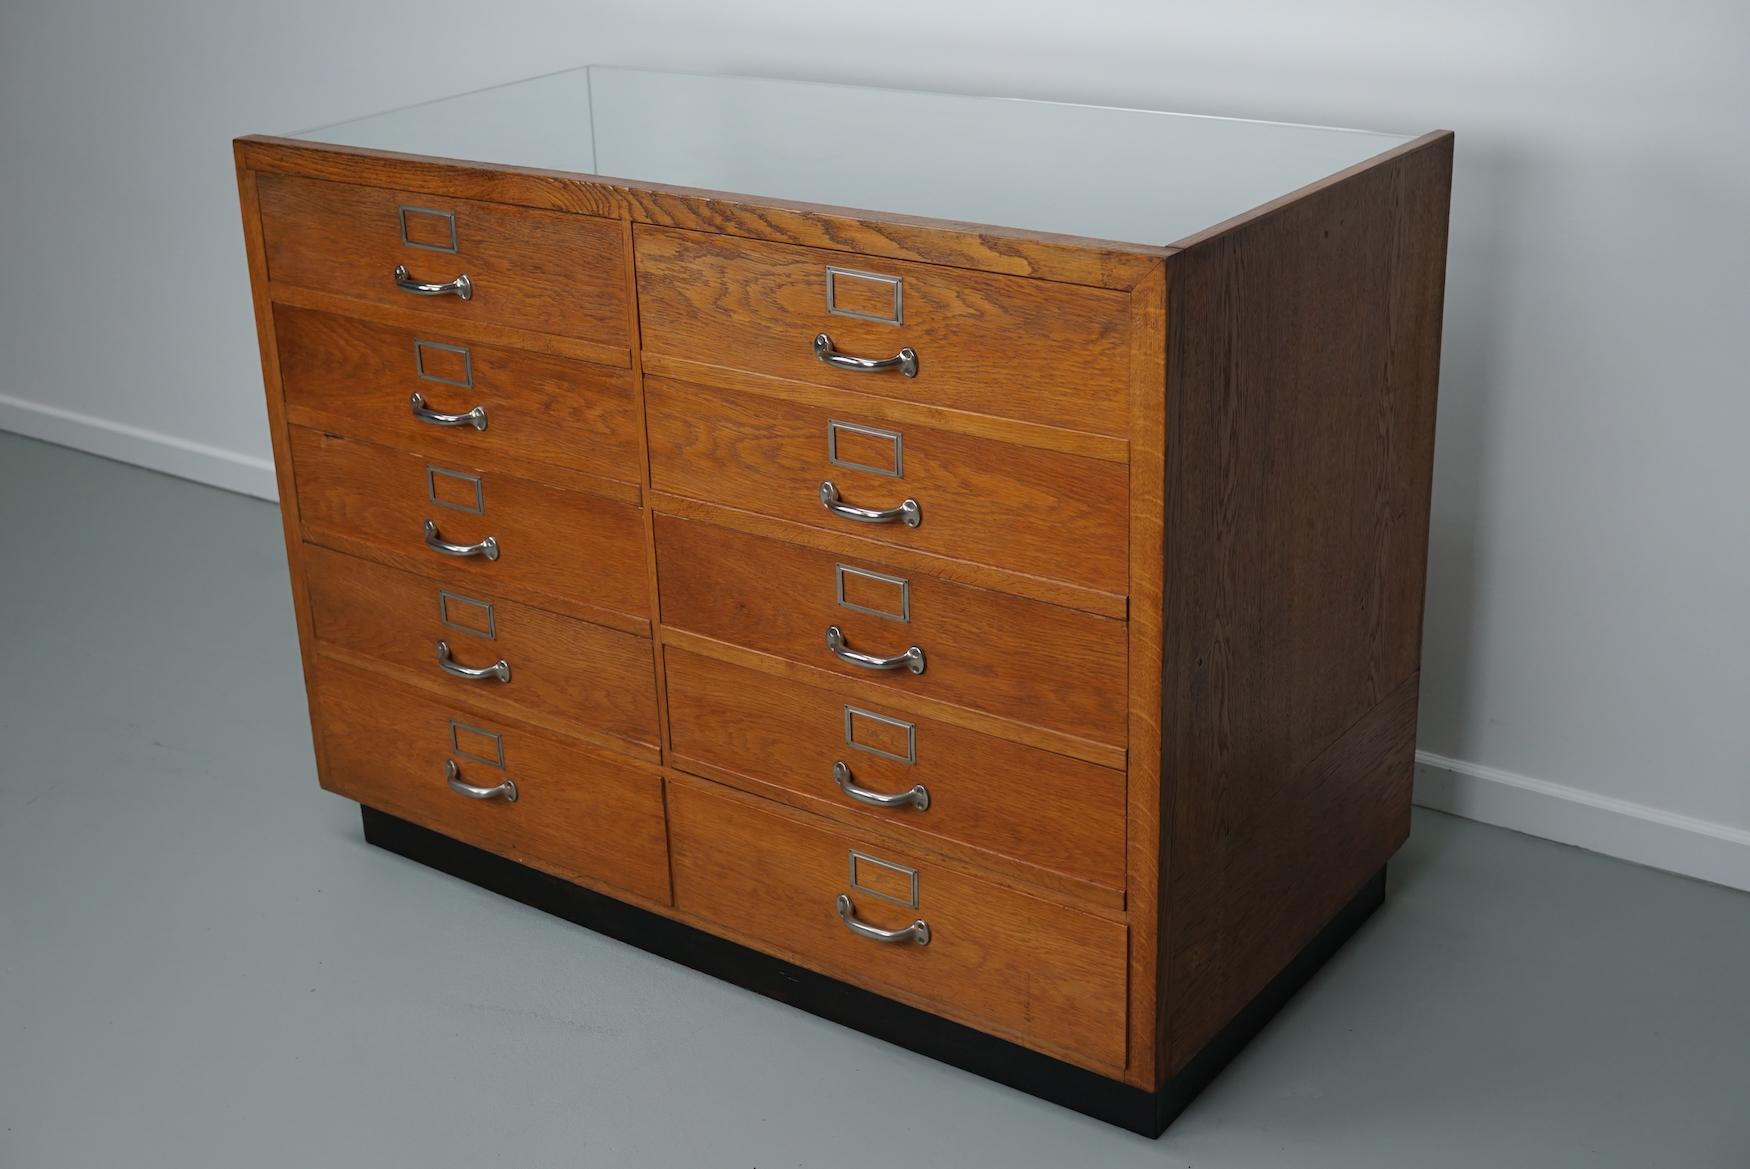 This shop counter was made and manufactured during the 1950s in Germany. It features an oak frame with oak drawers with chrome metal handles and a glass casing. It remains in a good vintage condition with some marks consistent with age and use.